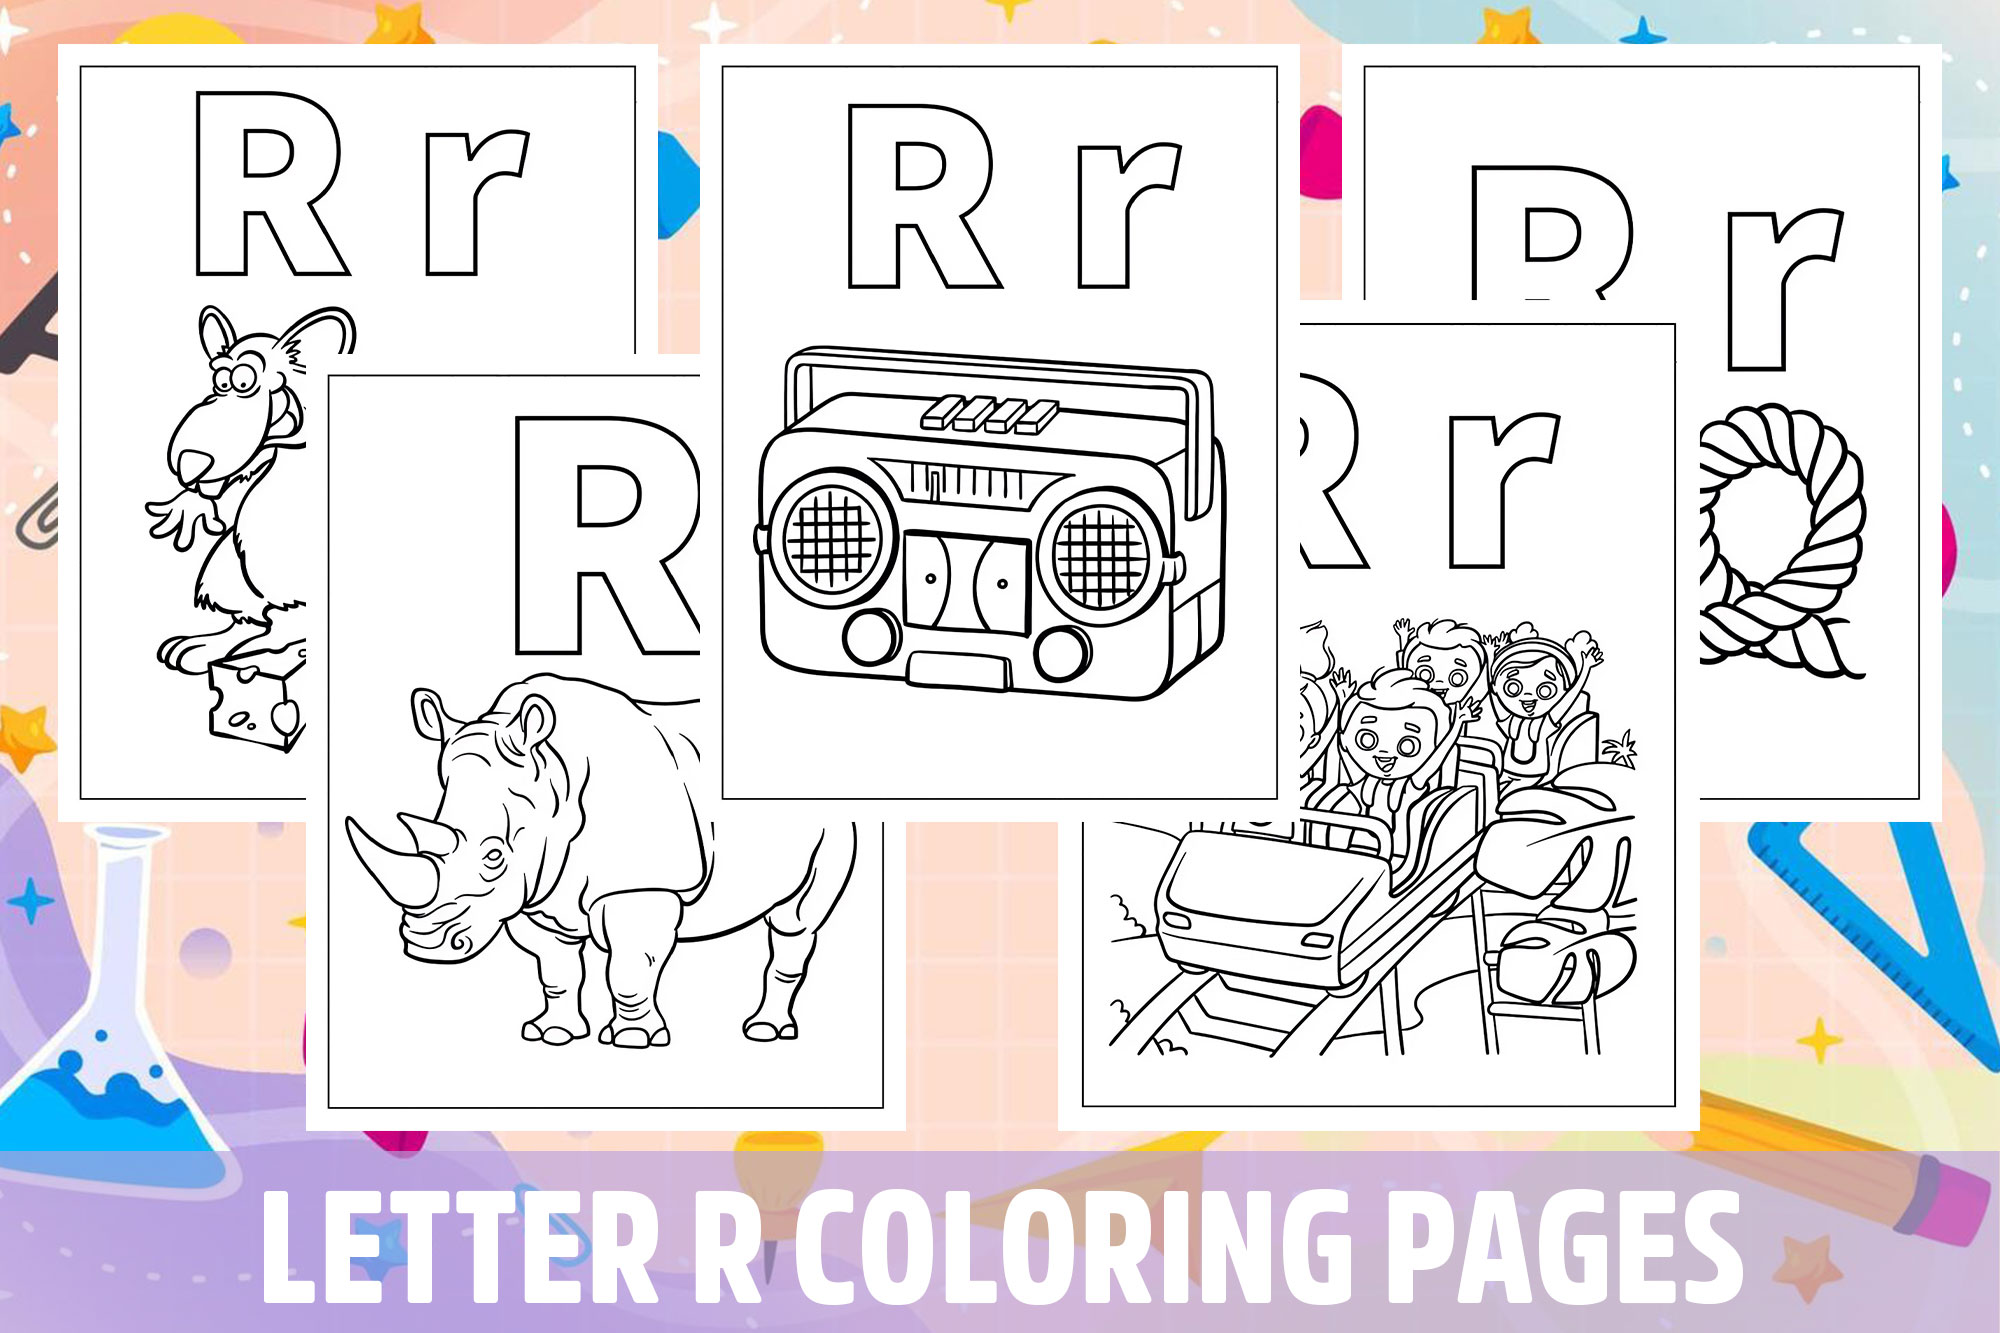 Letter r coloring pages for kids girls boys teens birthday school activity made by teachers